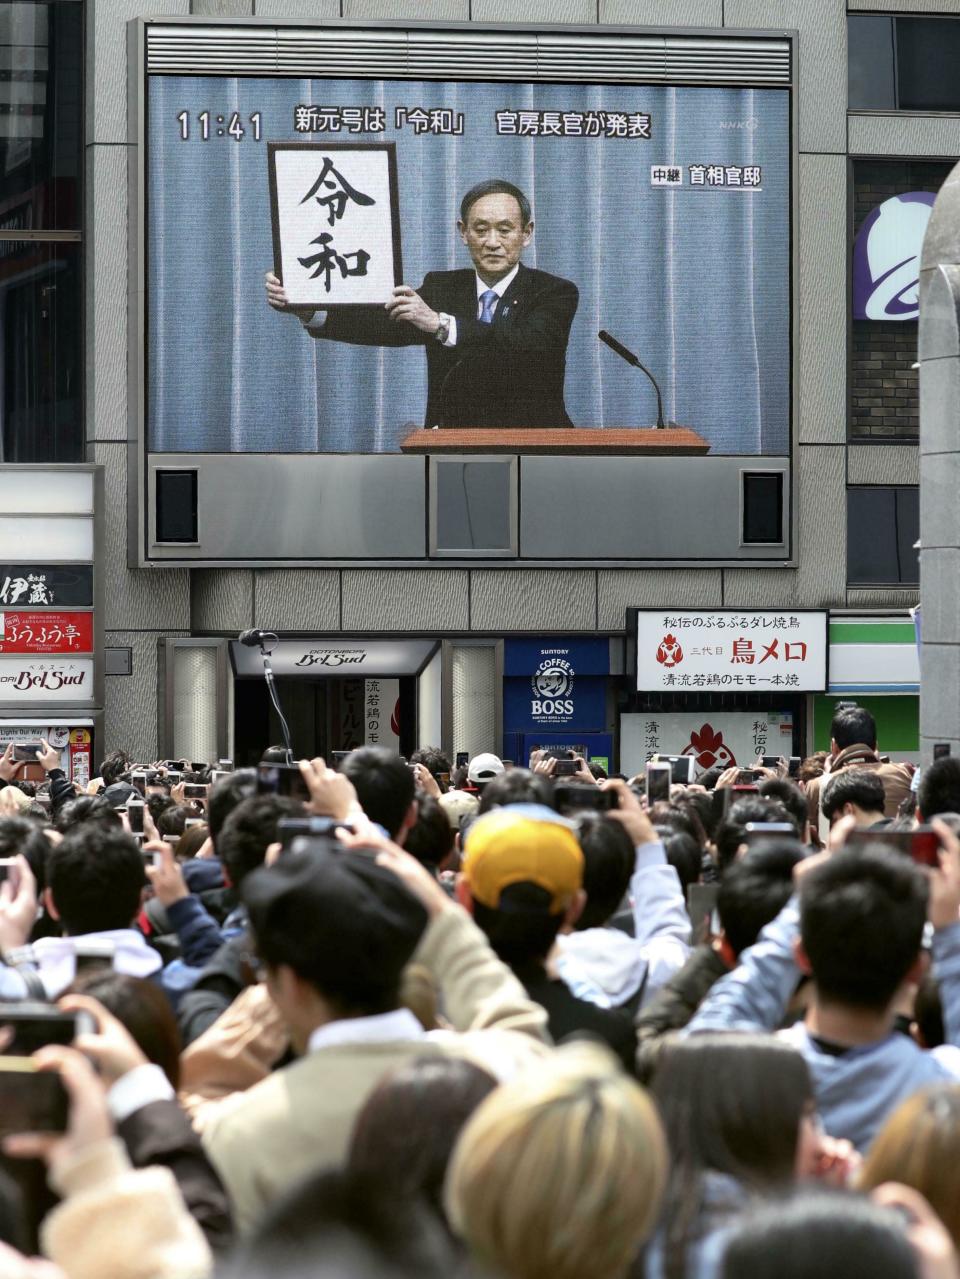 People gather to watch a huge screen which airs a live footage of a press conference by Chief Cabinet Secretary Yoshihide Suga, in Osaka Monday, April 1, 2019. The name of the era of Japan's soon-to-be-emperor Naruhito will be "Reiwa," the government announced Monday. (Takaki Yajima/Kyodo News via AP)